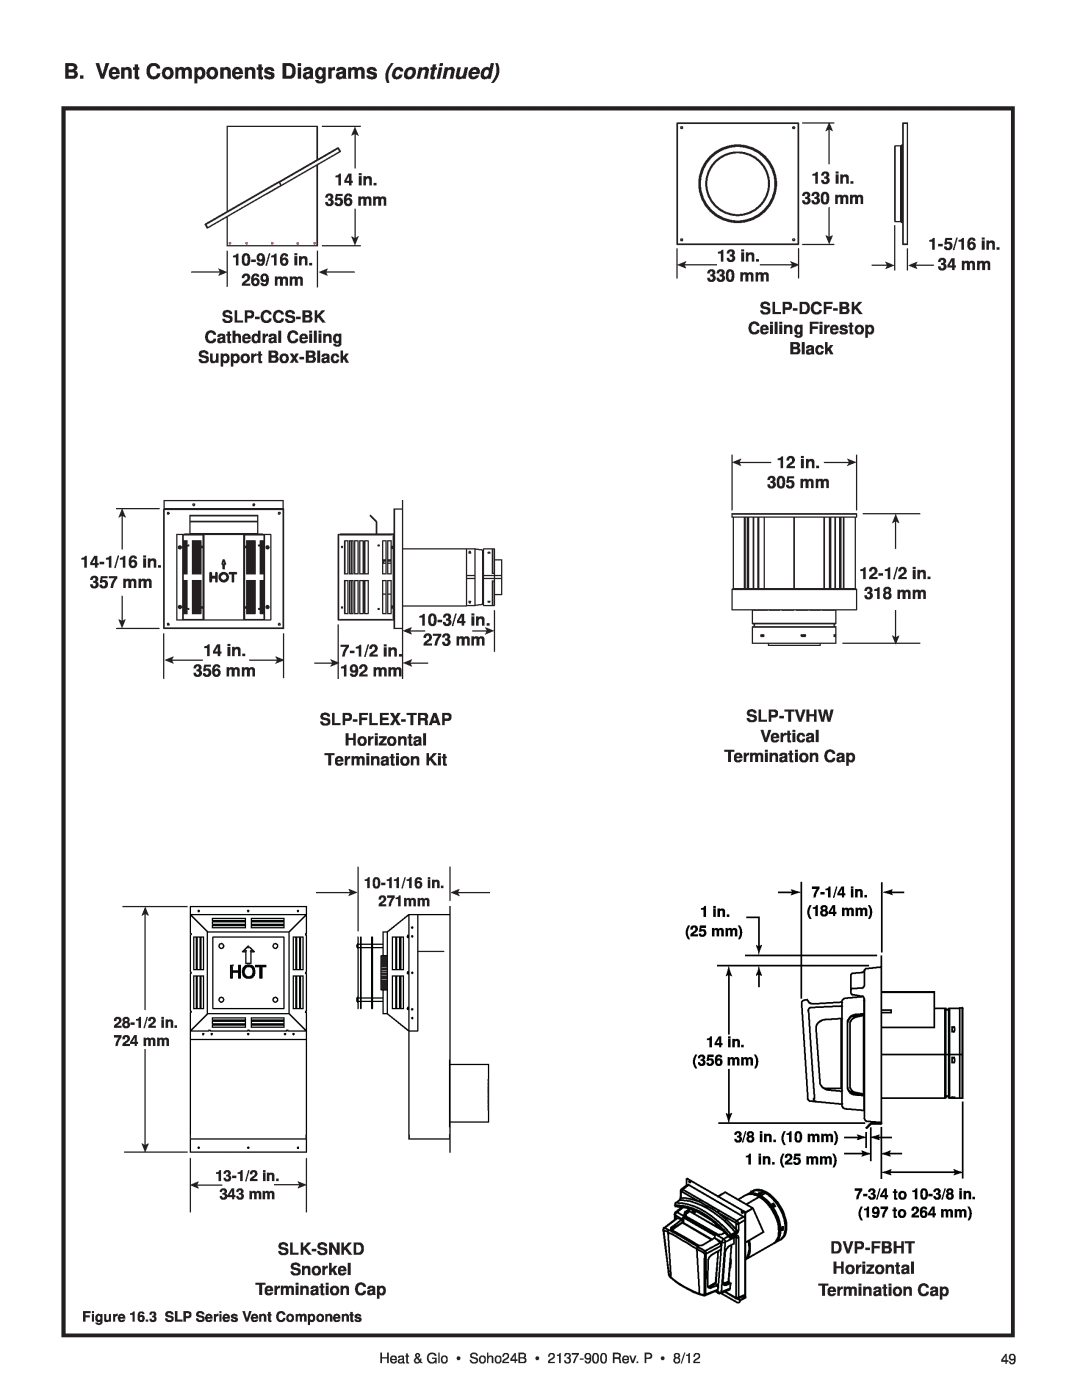 Heat & Glo LifeStyle 2137-900 owner manual B. Vent Components Diagrams continued, 14 in 